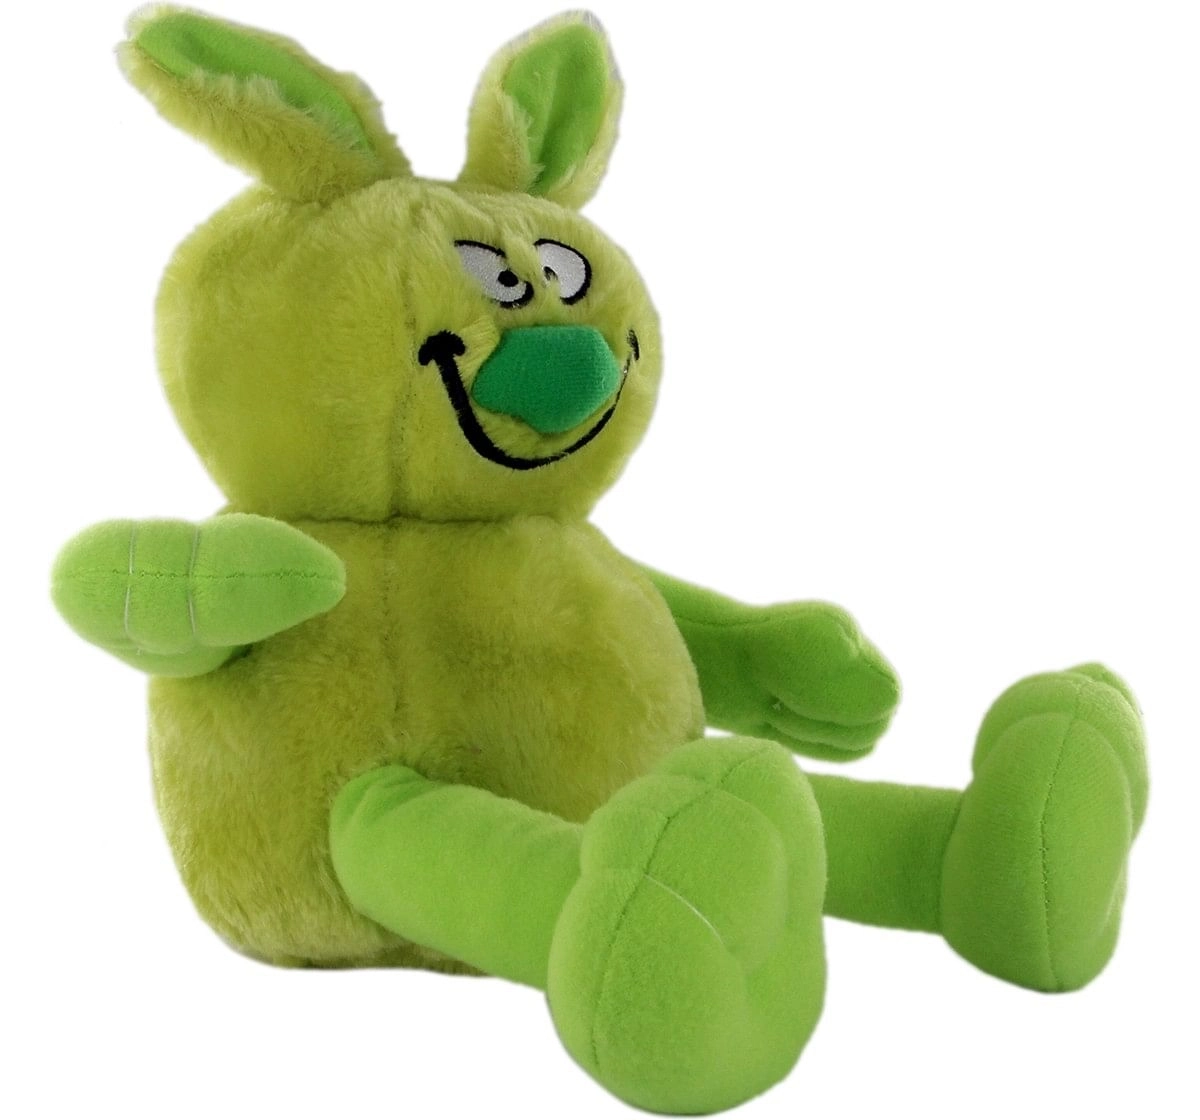 Hamleys Movers & Shakers- Ziggles Green Interactive Soft Toys for Kids age 2Y+ - 13 Cm (Green)